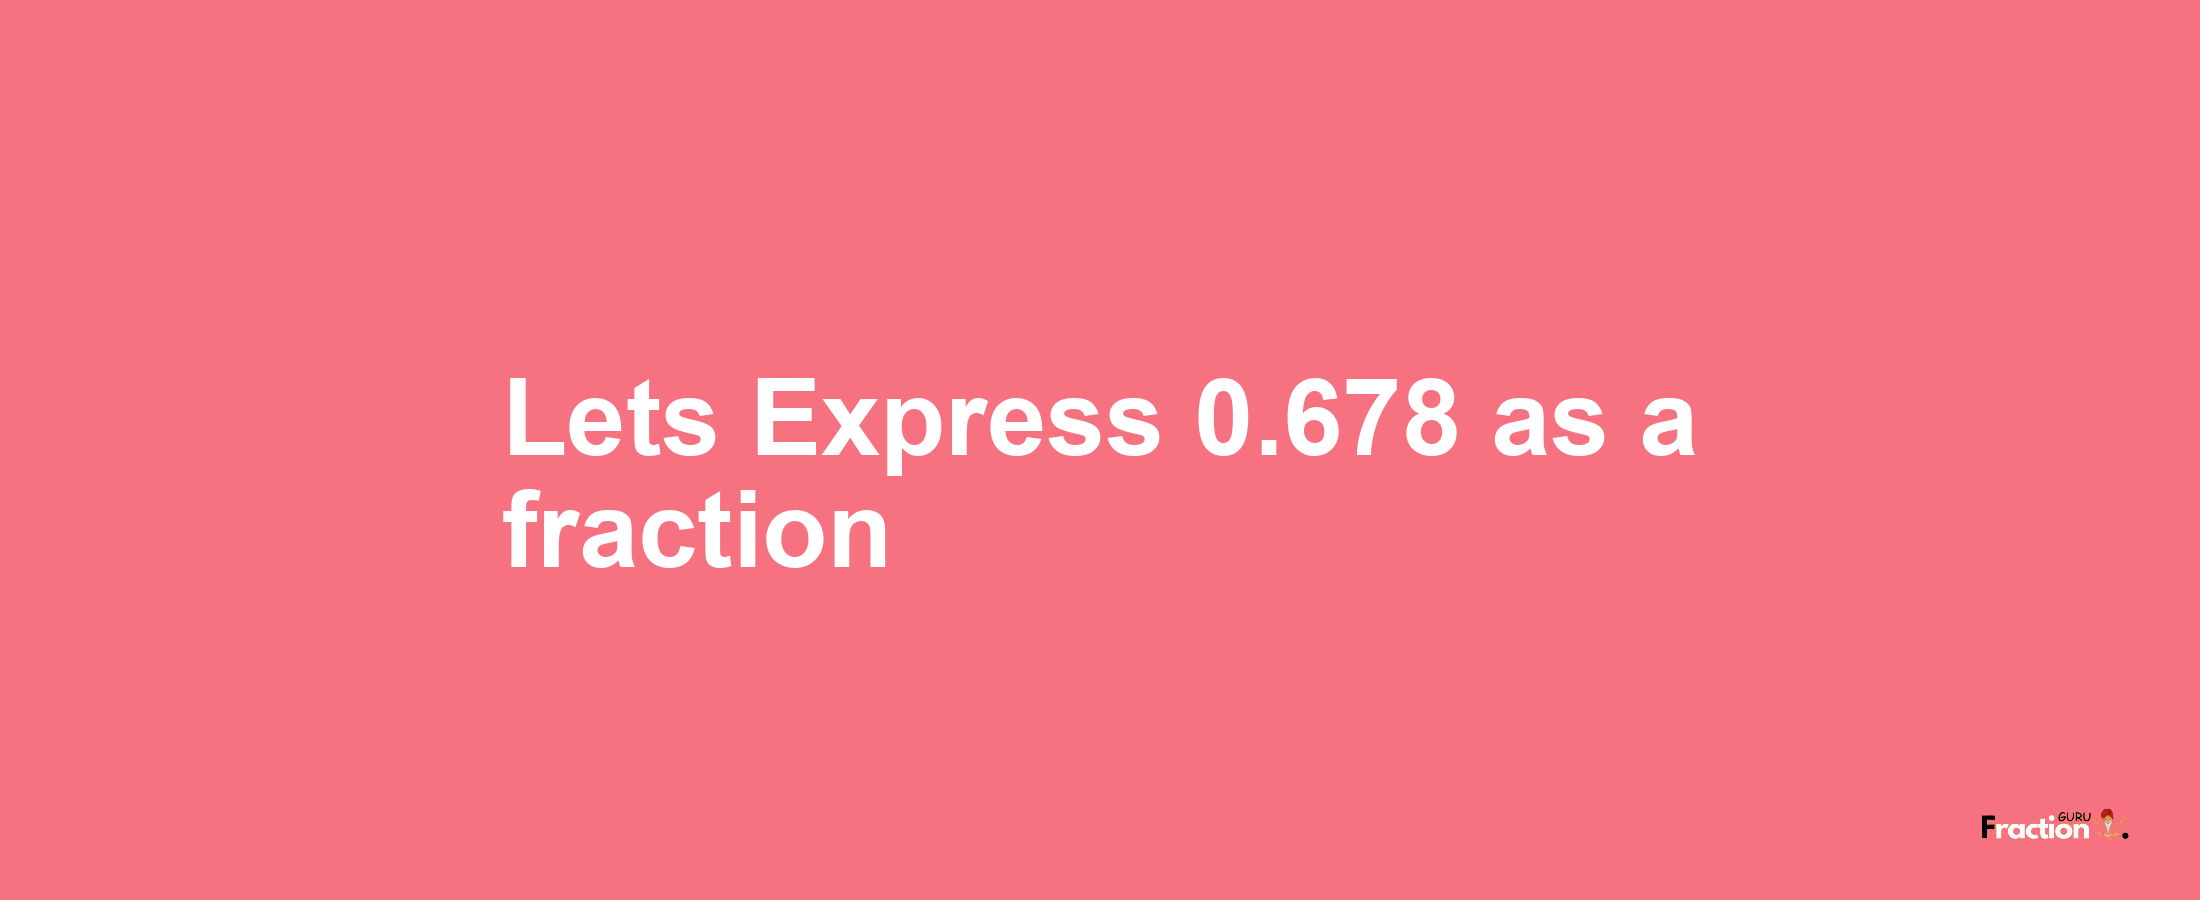 Lets Express 0.678 as afraction